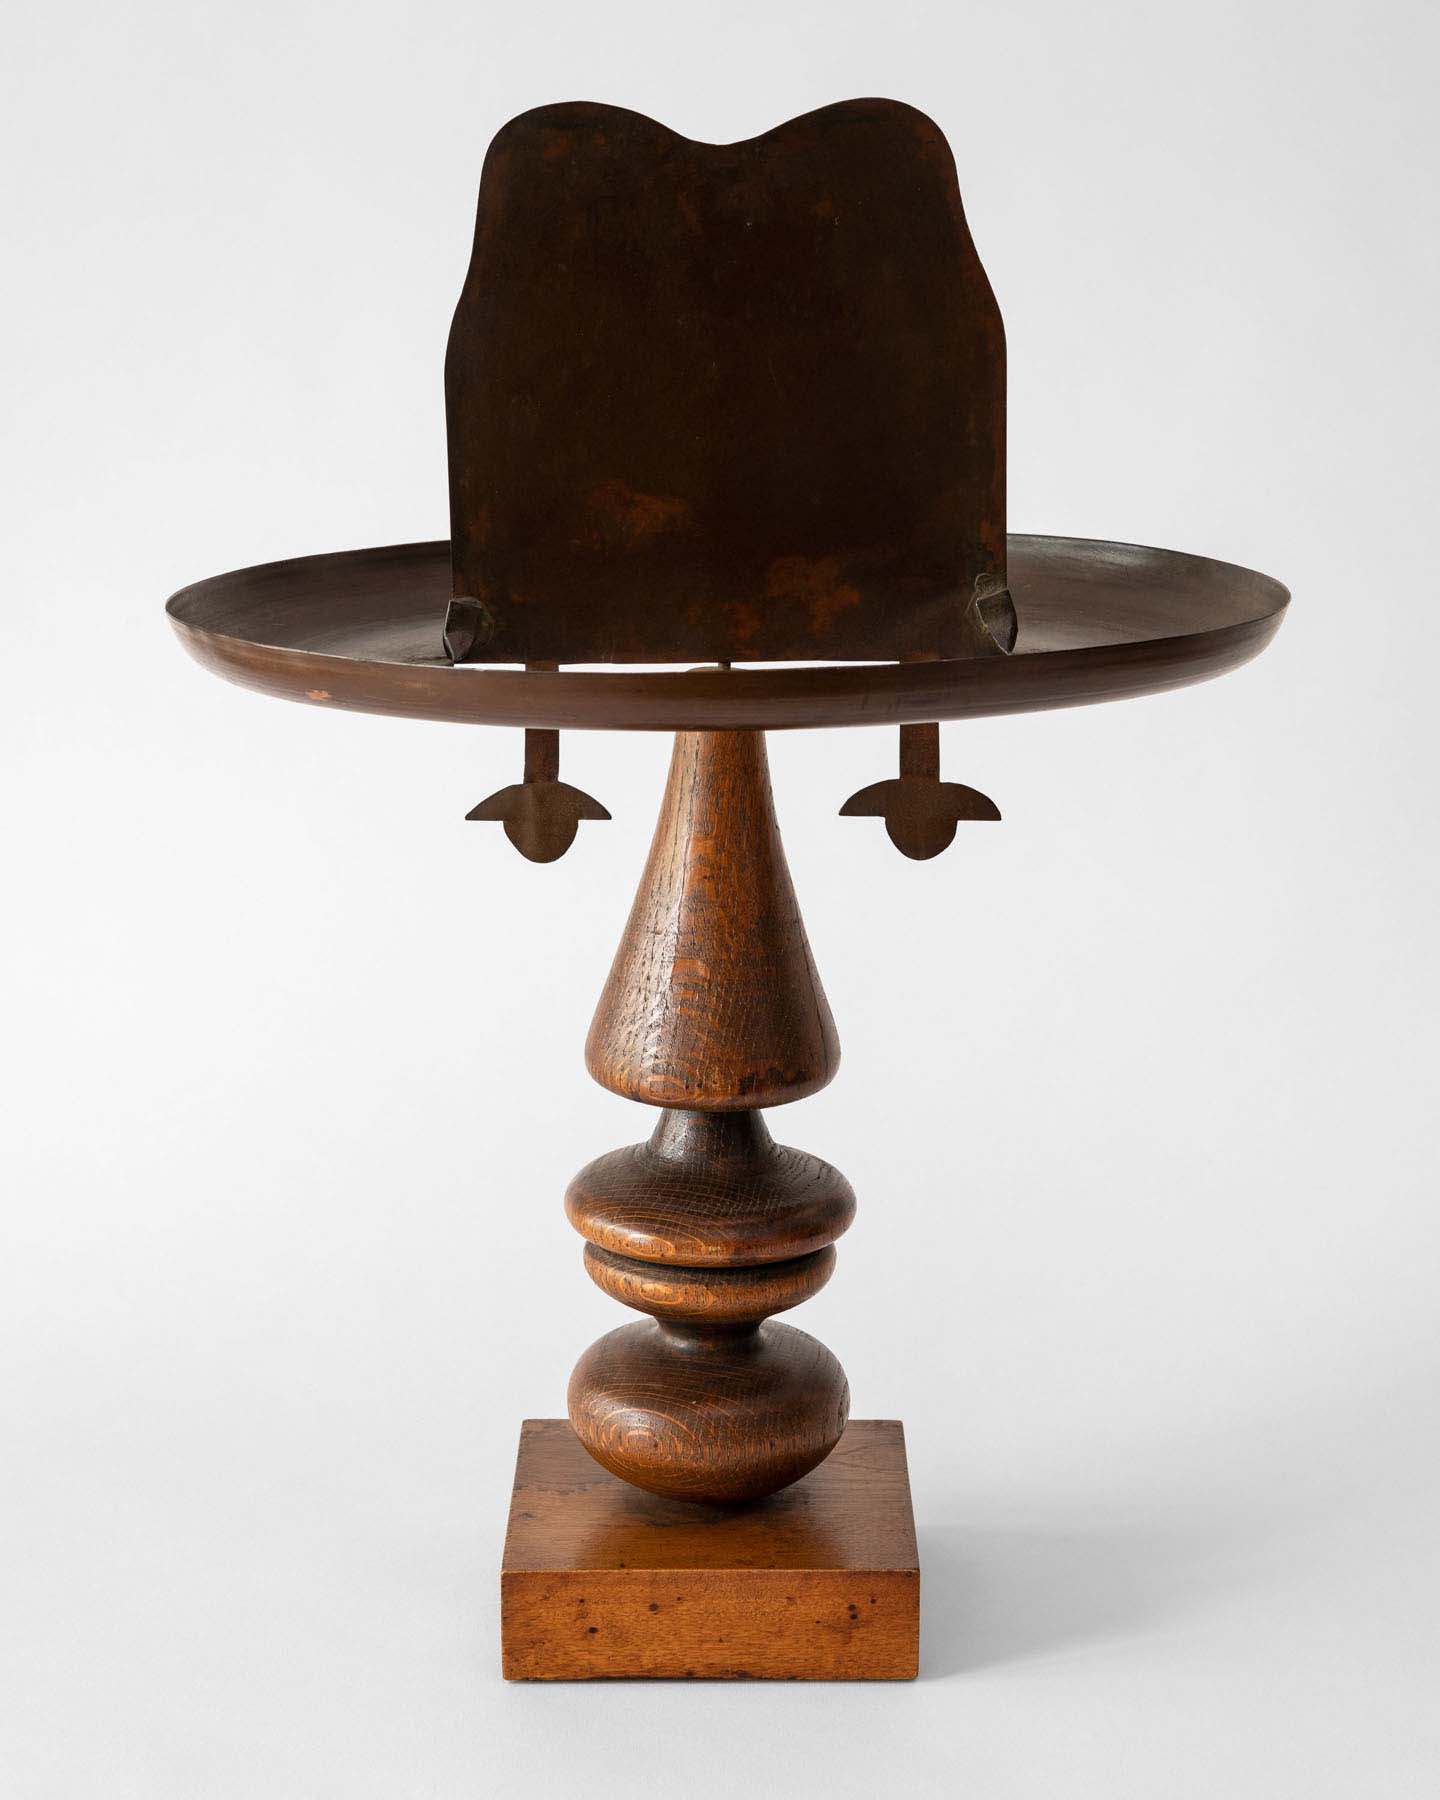 A wood and copper abstract sculpture of a cowboy head.